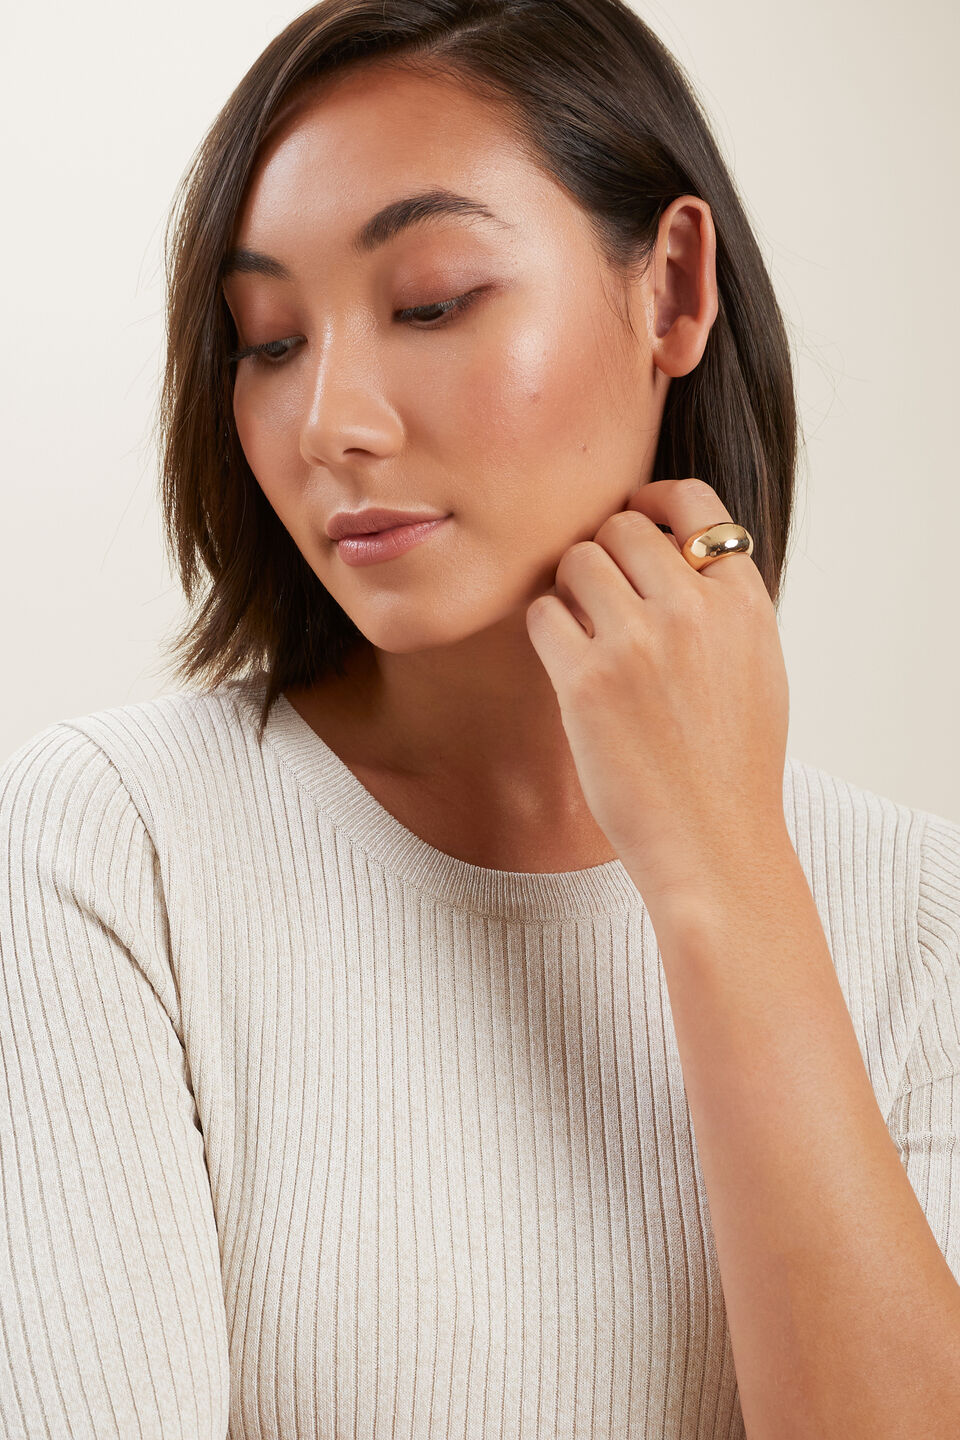 Moulded Dome Ring  Gold